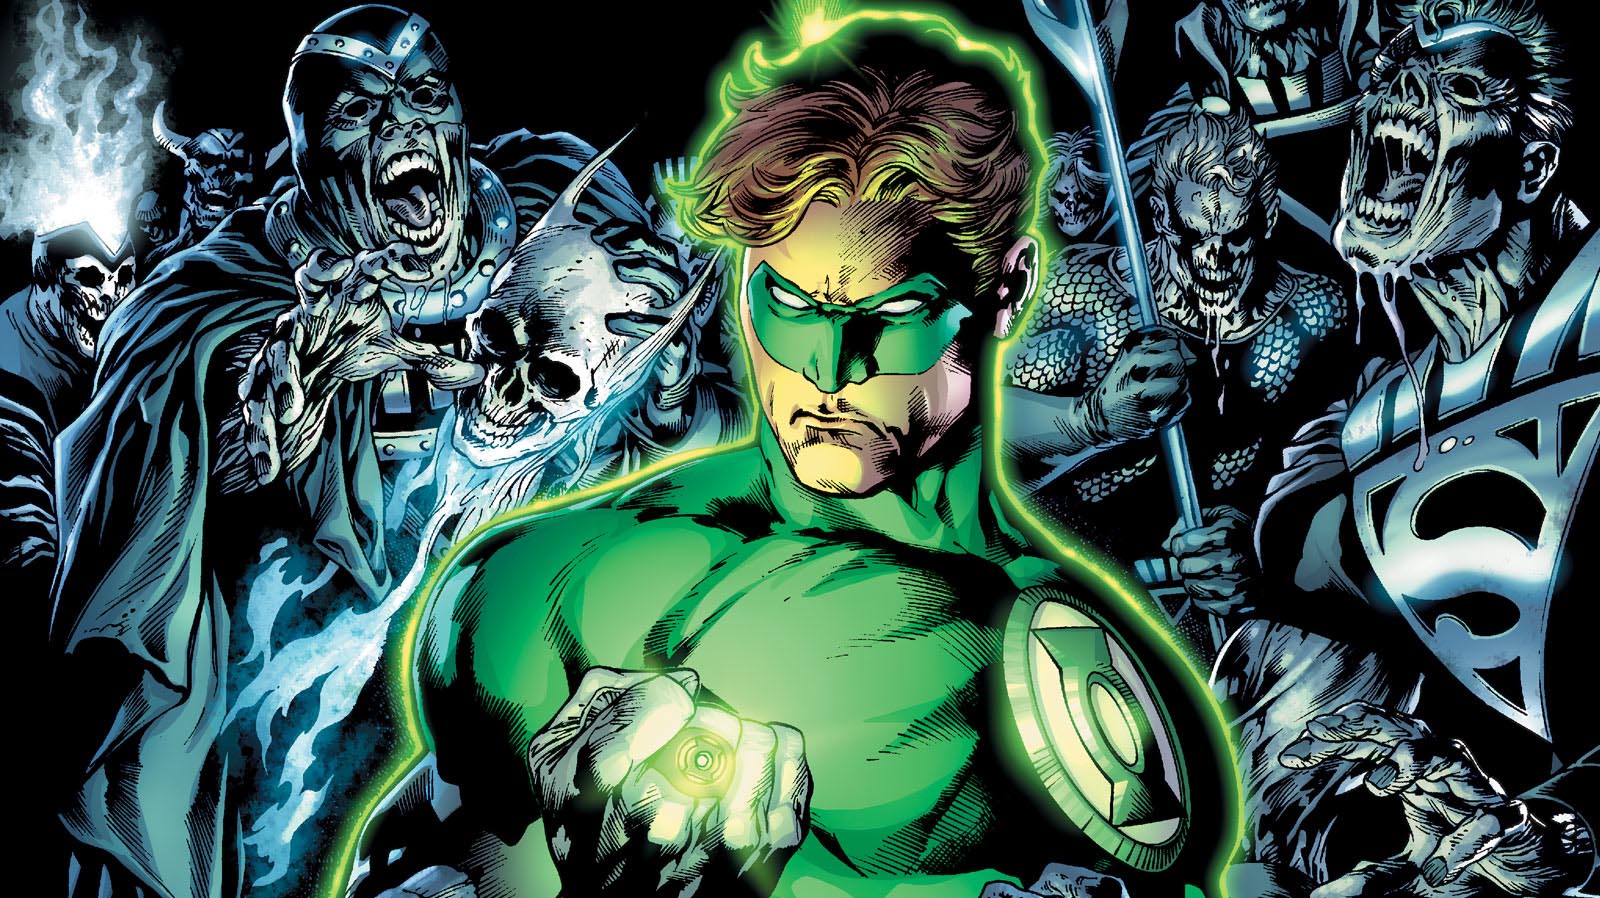 GREEN LANTERN #20 [Review]: All good things must come to an end...